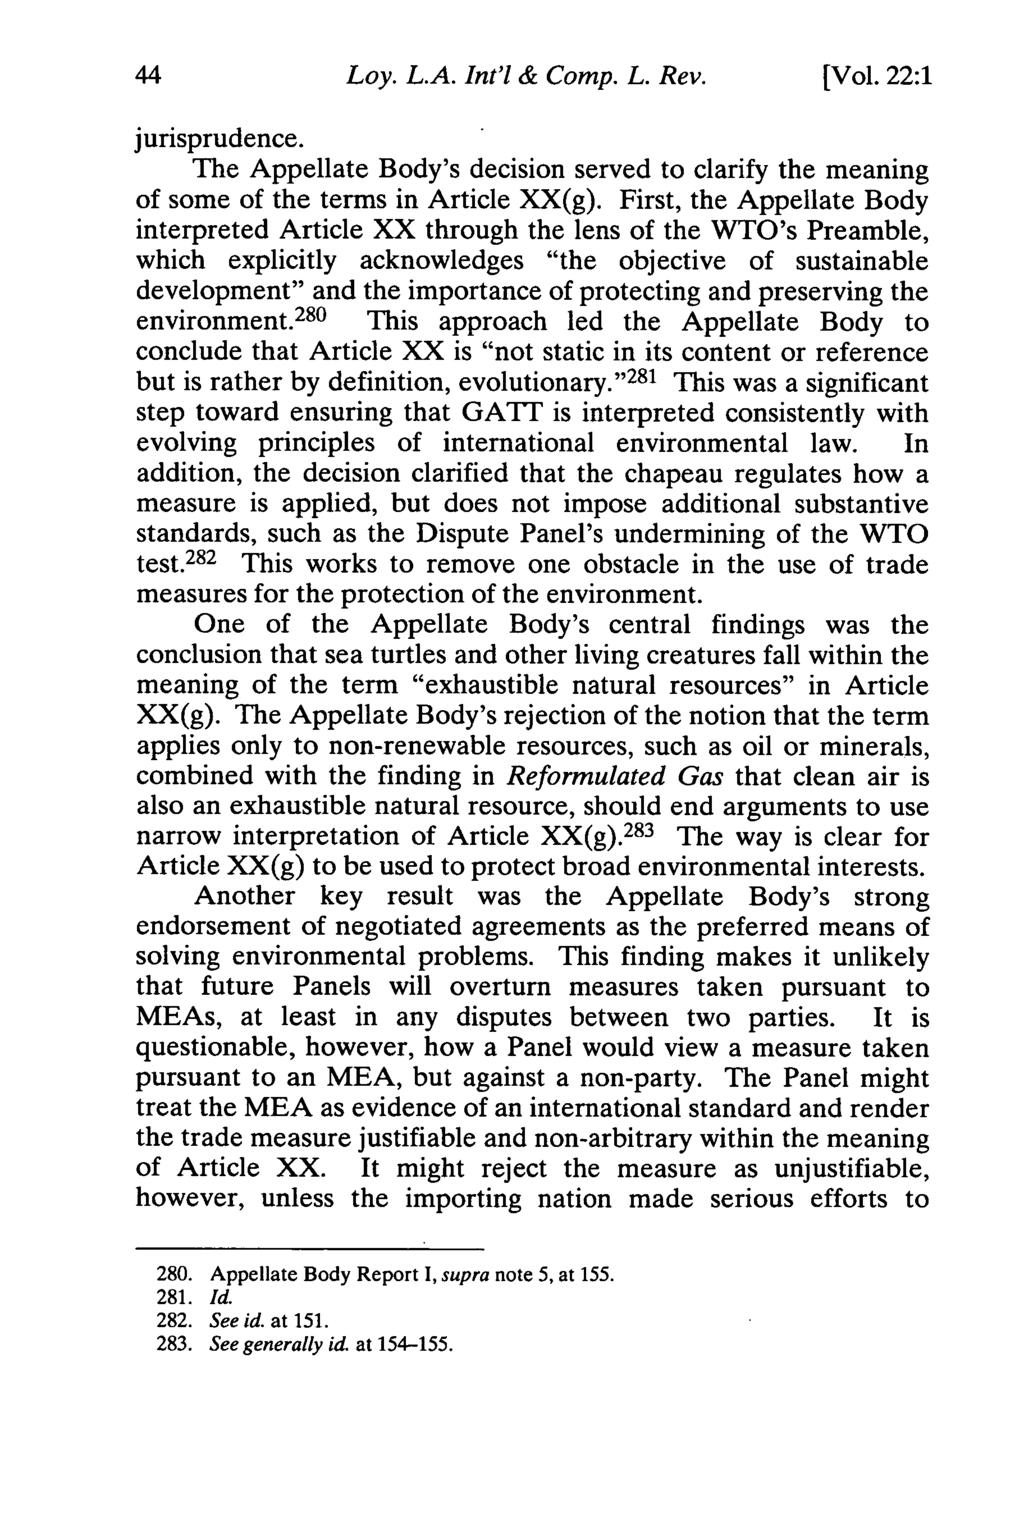 Loy. L.A. Int'l & Comp. L. Rev. [Vol. 22:1 jurisprudence. The Appellate Body's decision served to clarify the meaning of some of the terms in Article XX(g).